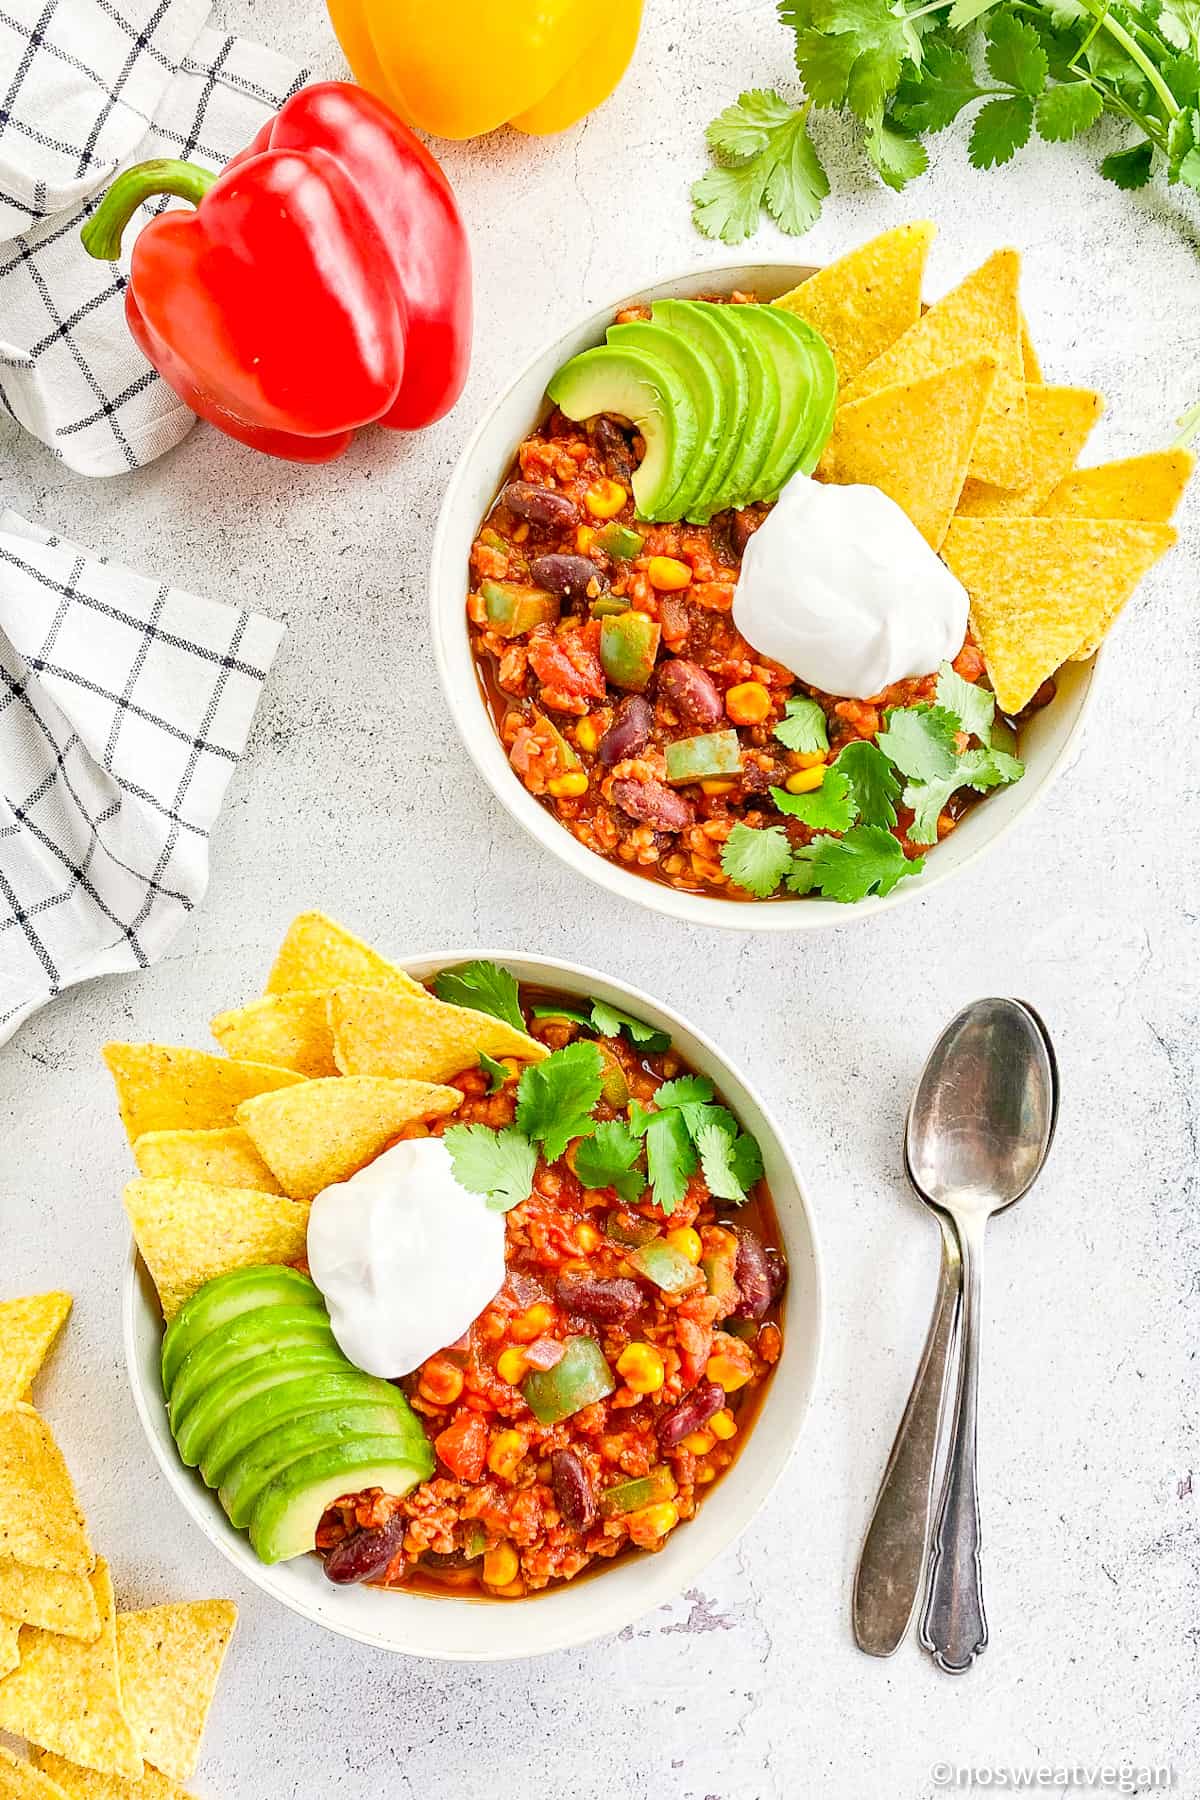 Two bowls with vegan chili.